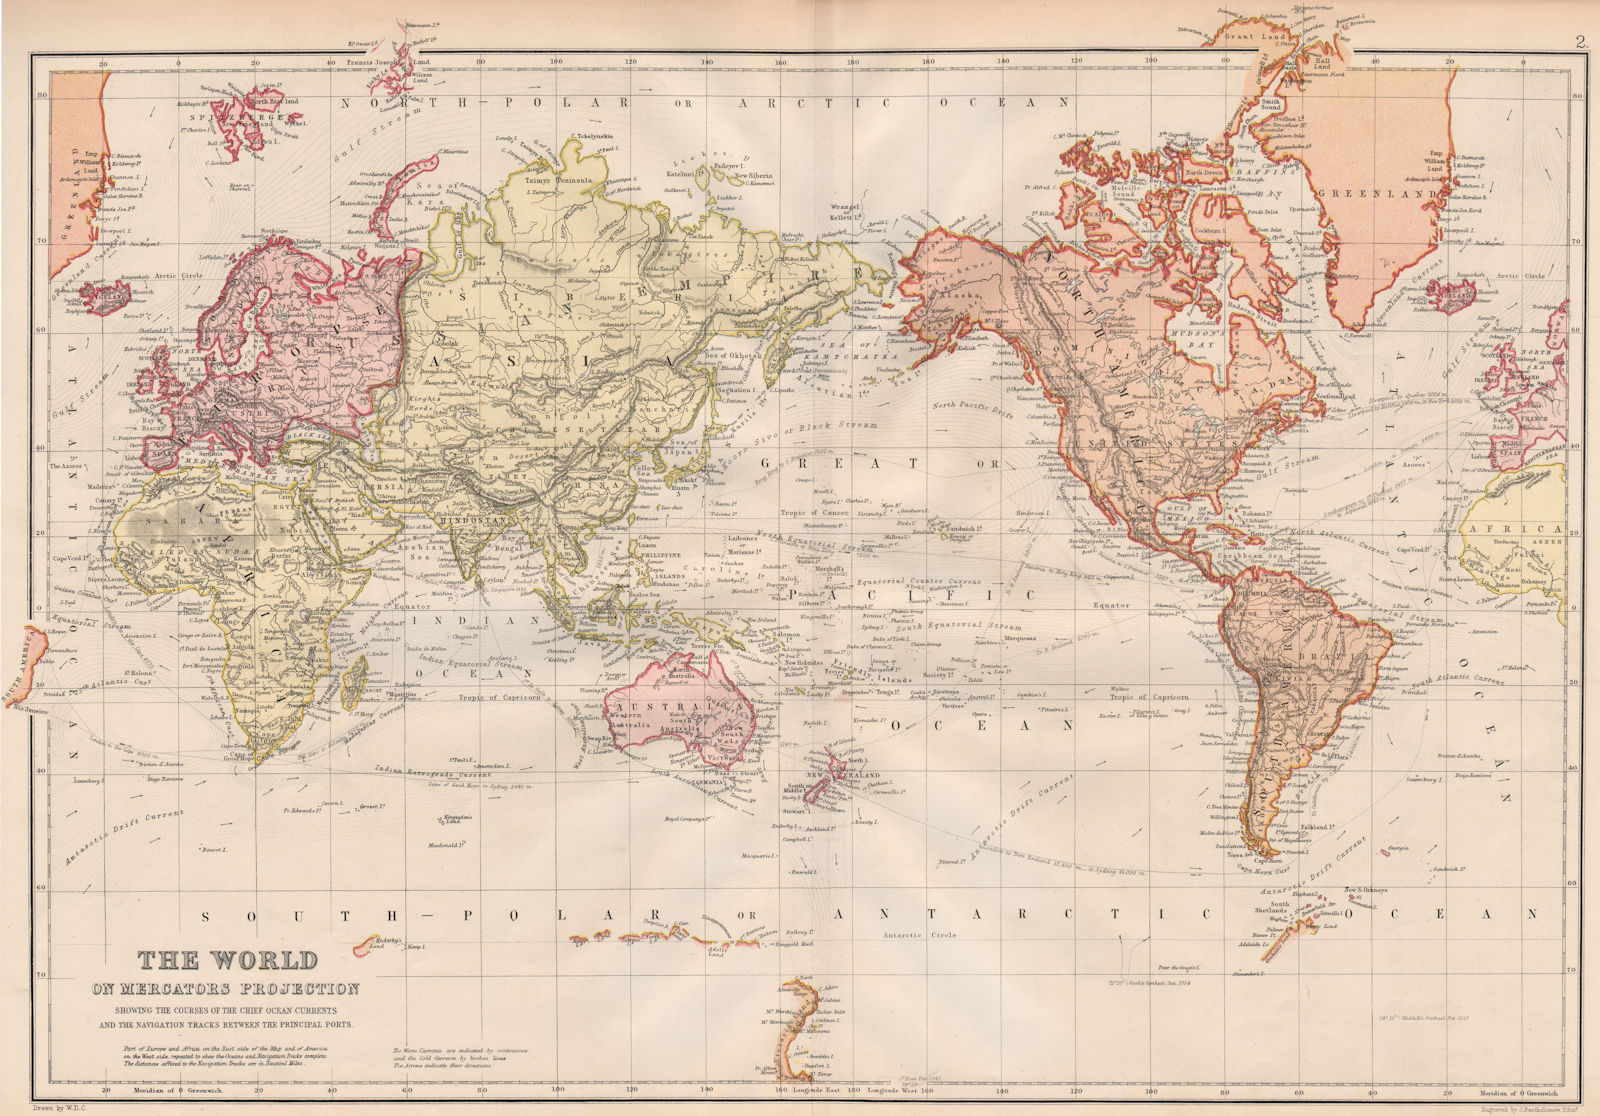 Associate Product WORLD. Mercator's projection. Ocean currents & shipping routes. BLACKIE 1882 map